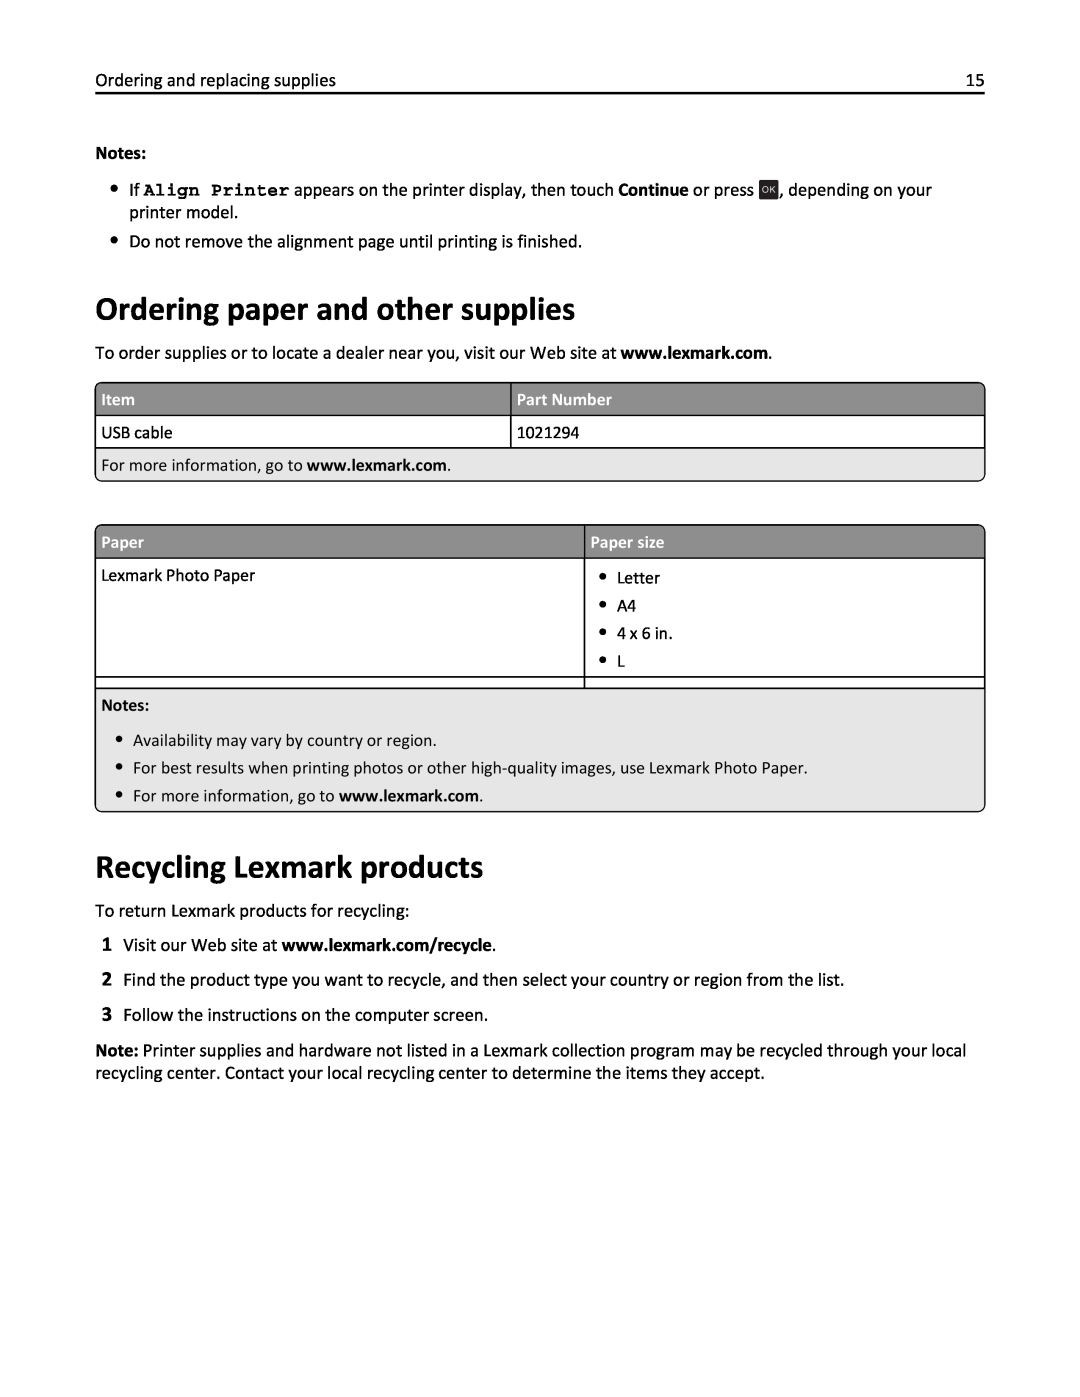 Lexmark PRO4000C, 90P3000 manual Ordering paper and other supplies, Recycling Lexmark products, Part Number, Paper size 